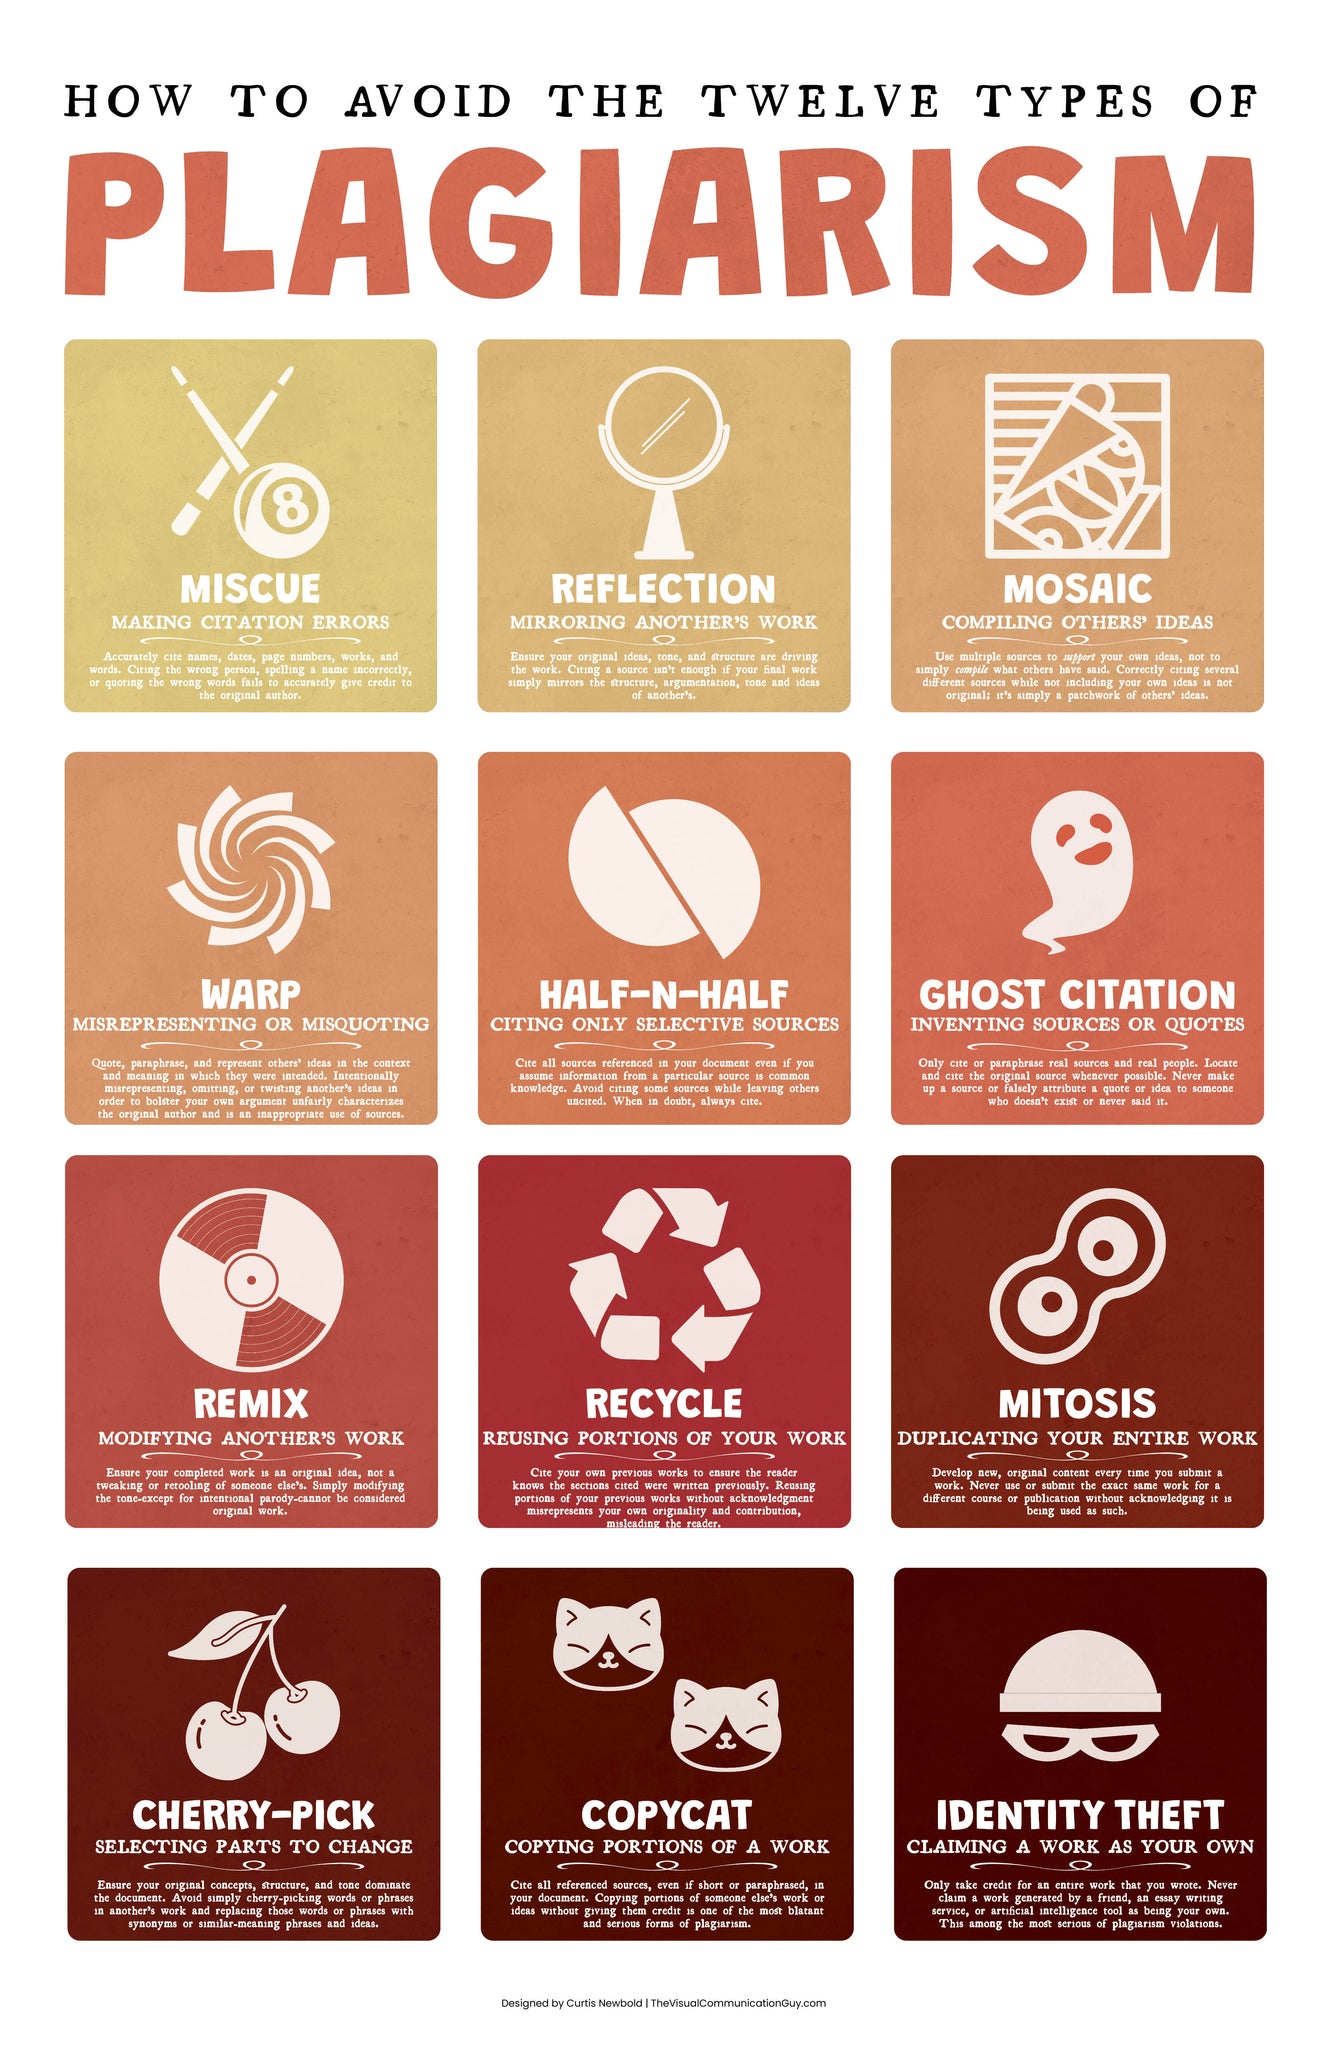 How to Avoid the Twelve Types of Plagiarism 20x30 Poster Print